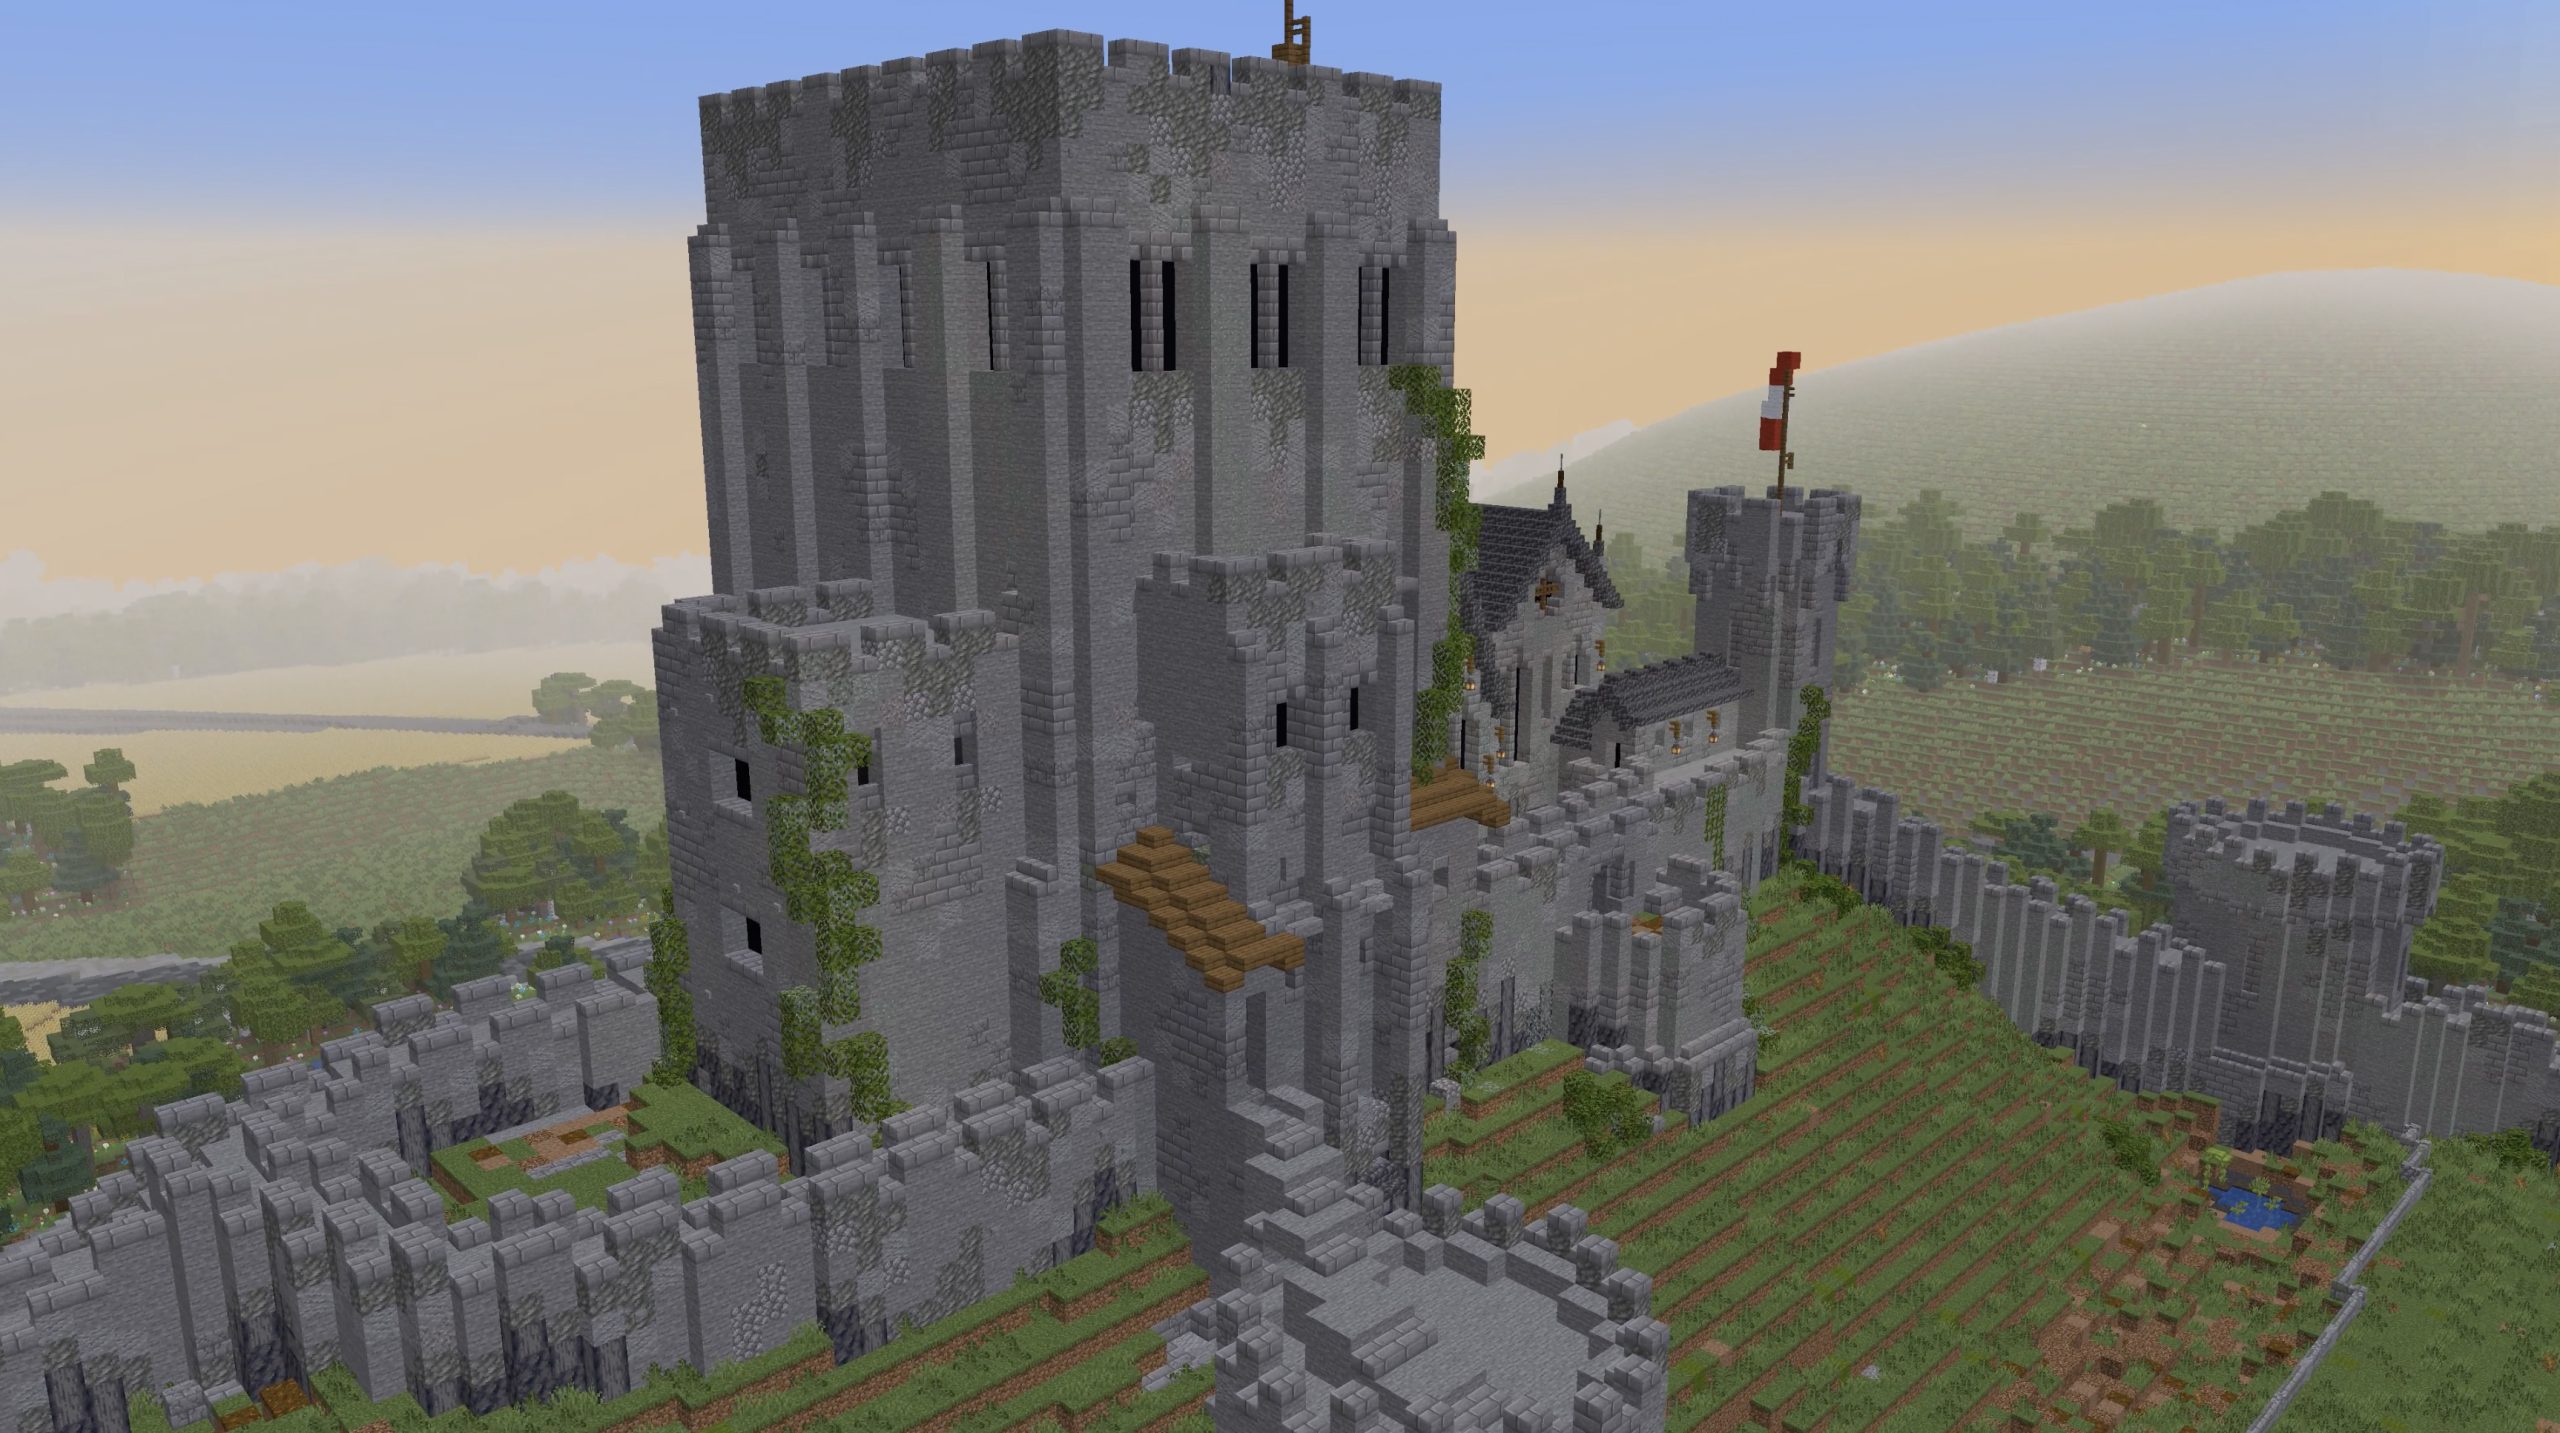 Xbox partners with the National Trust to recreate real-life castle ruins in Minecraft